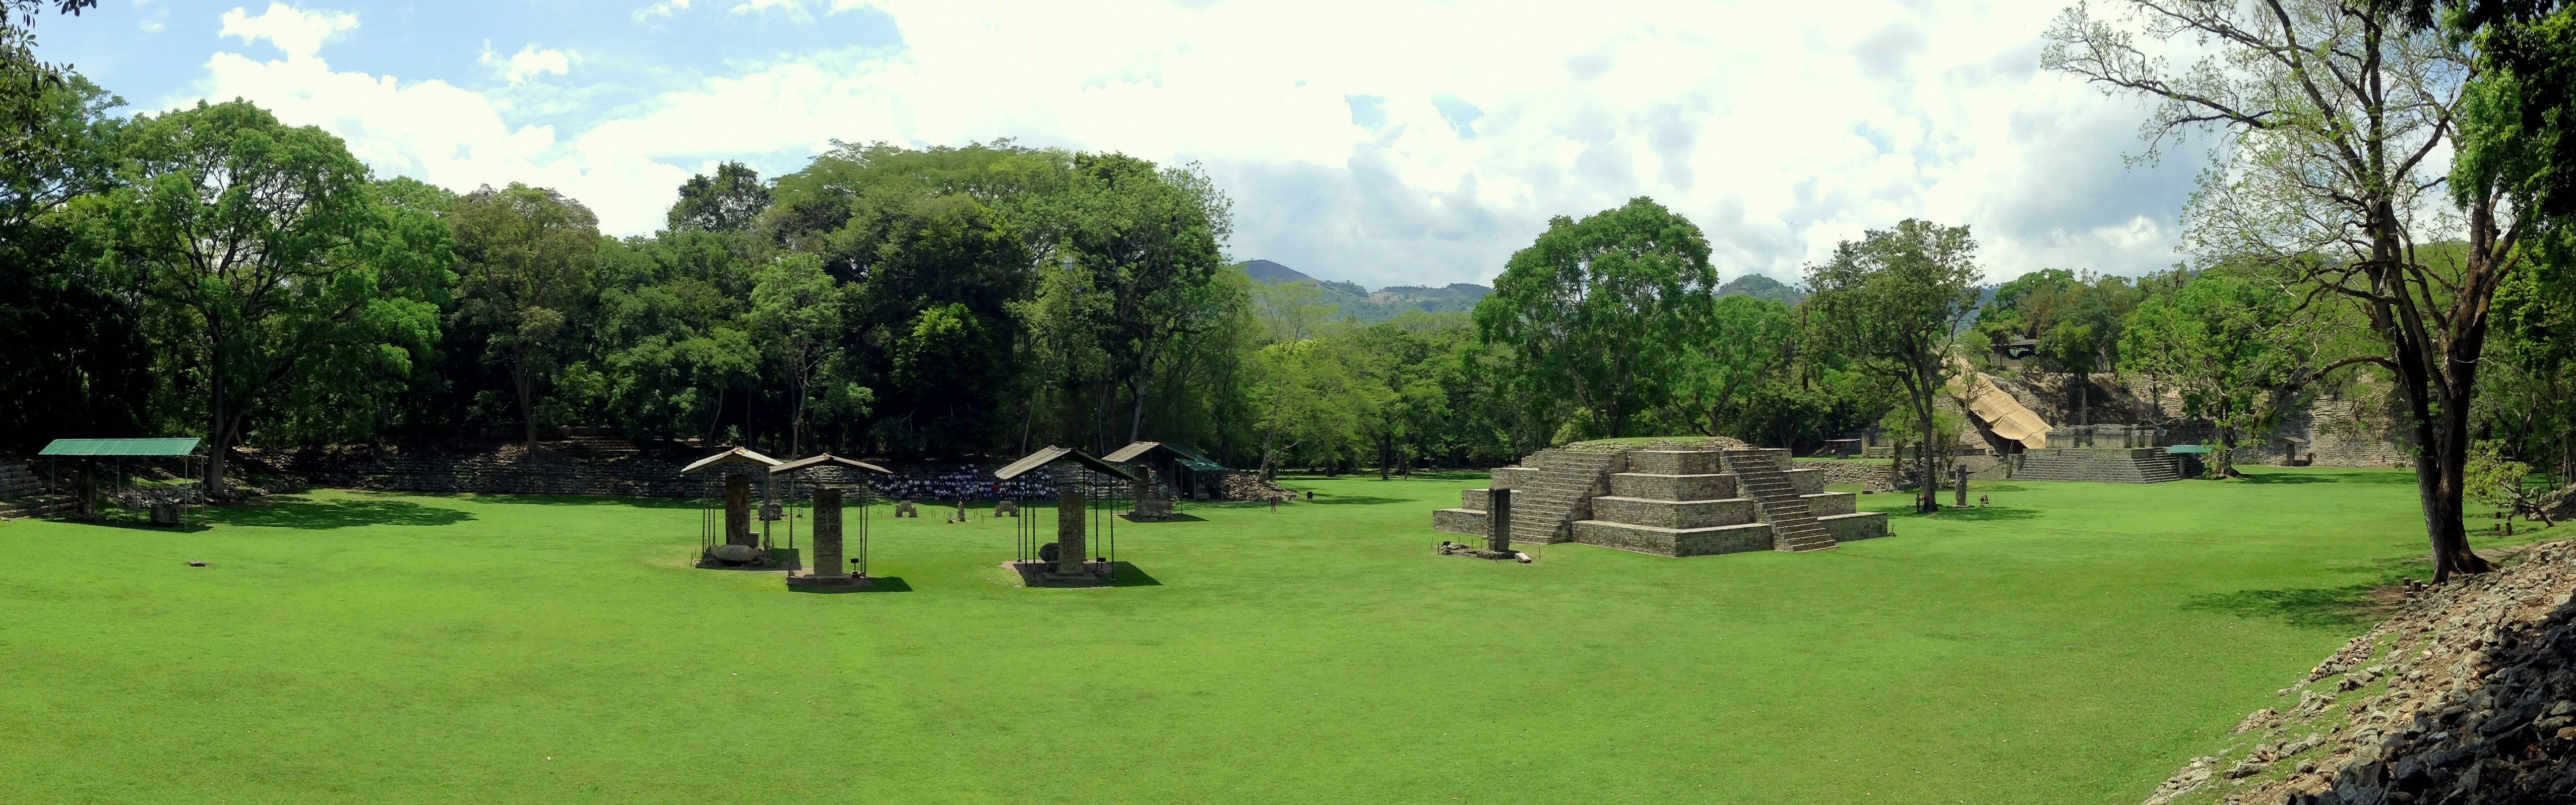 A panorama of the Great Plaza of the Copan Architectural Site, western Honduras. June 7th 2013 (iPod)